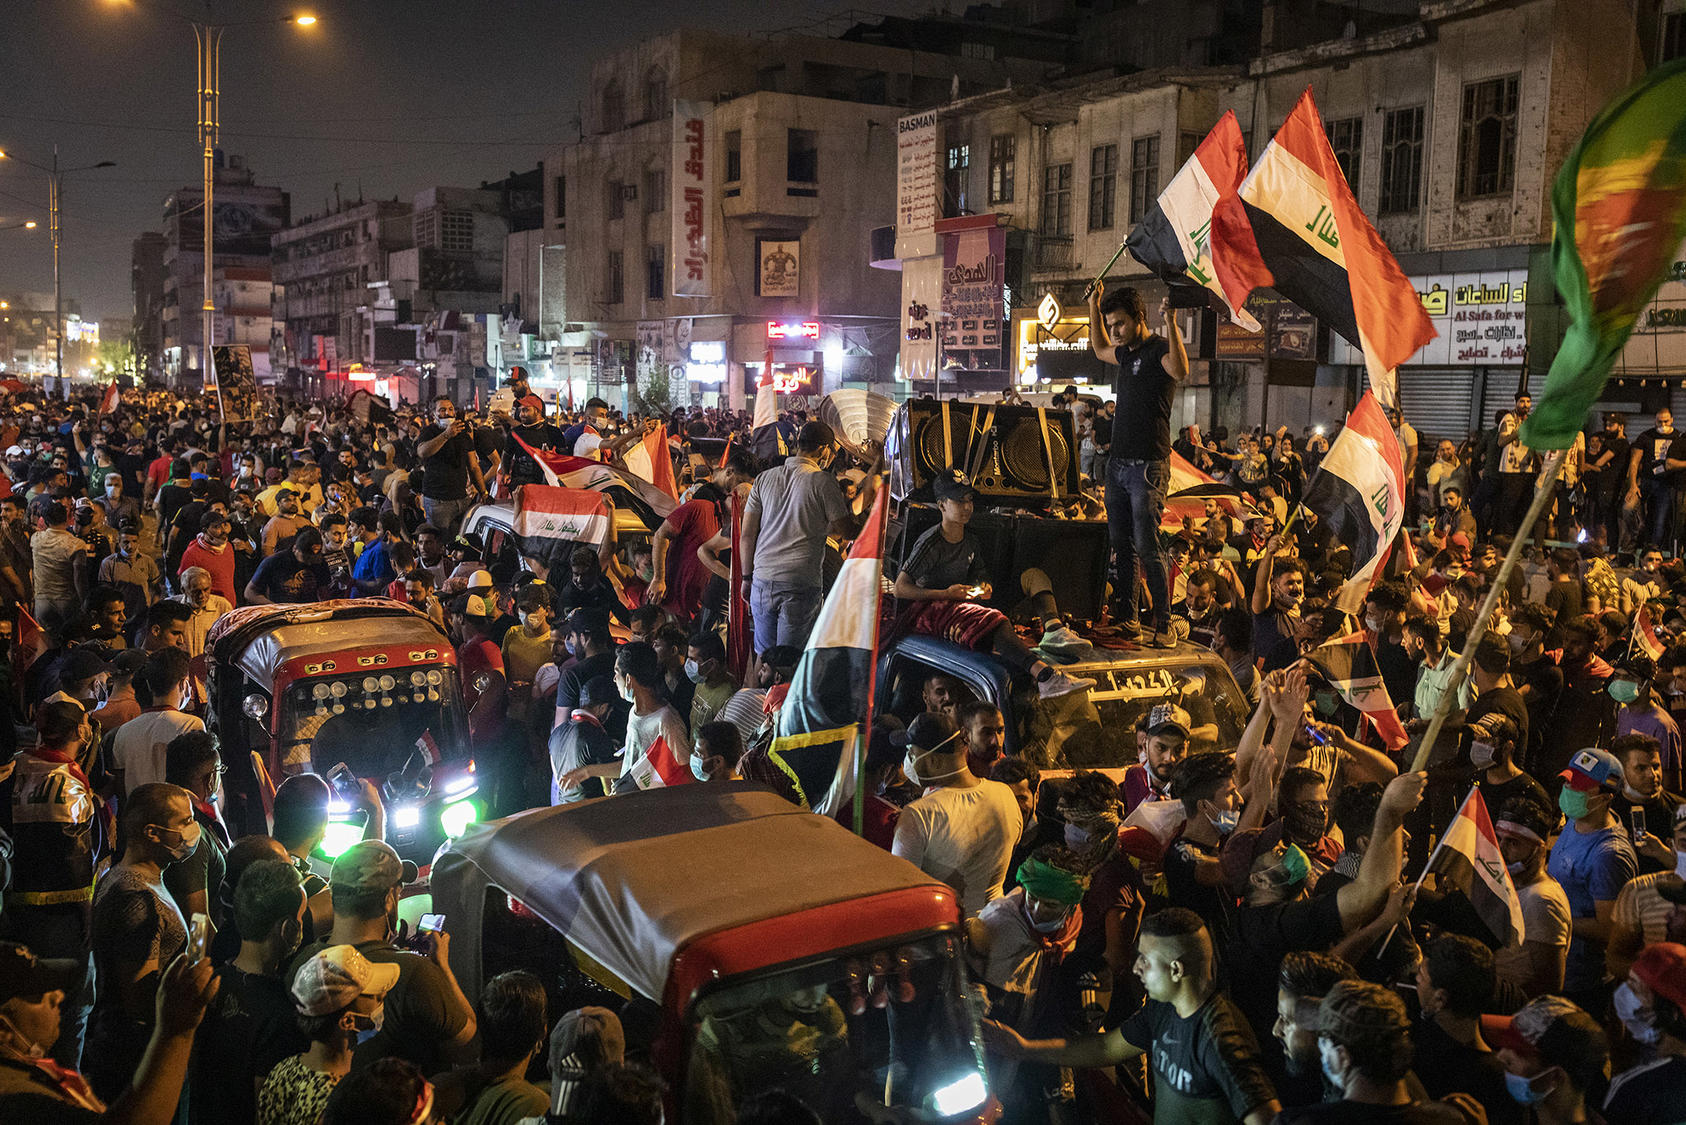 Iraqi protesters, mostly young men, fill streets around Baghdad’s Tahrir Square in late October. They demand effectively ‘a new social contract’ among Iraqis, USIP’s Elie Abouaoun says. (Ivor Prickett/The New York Times)